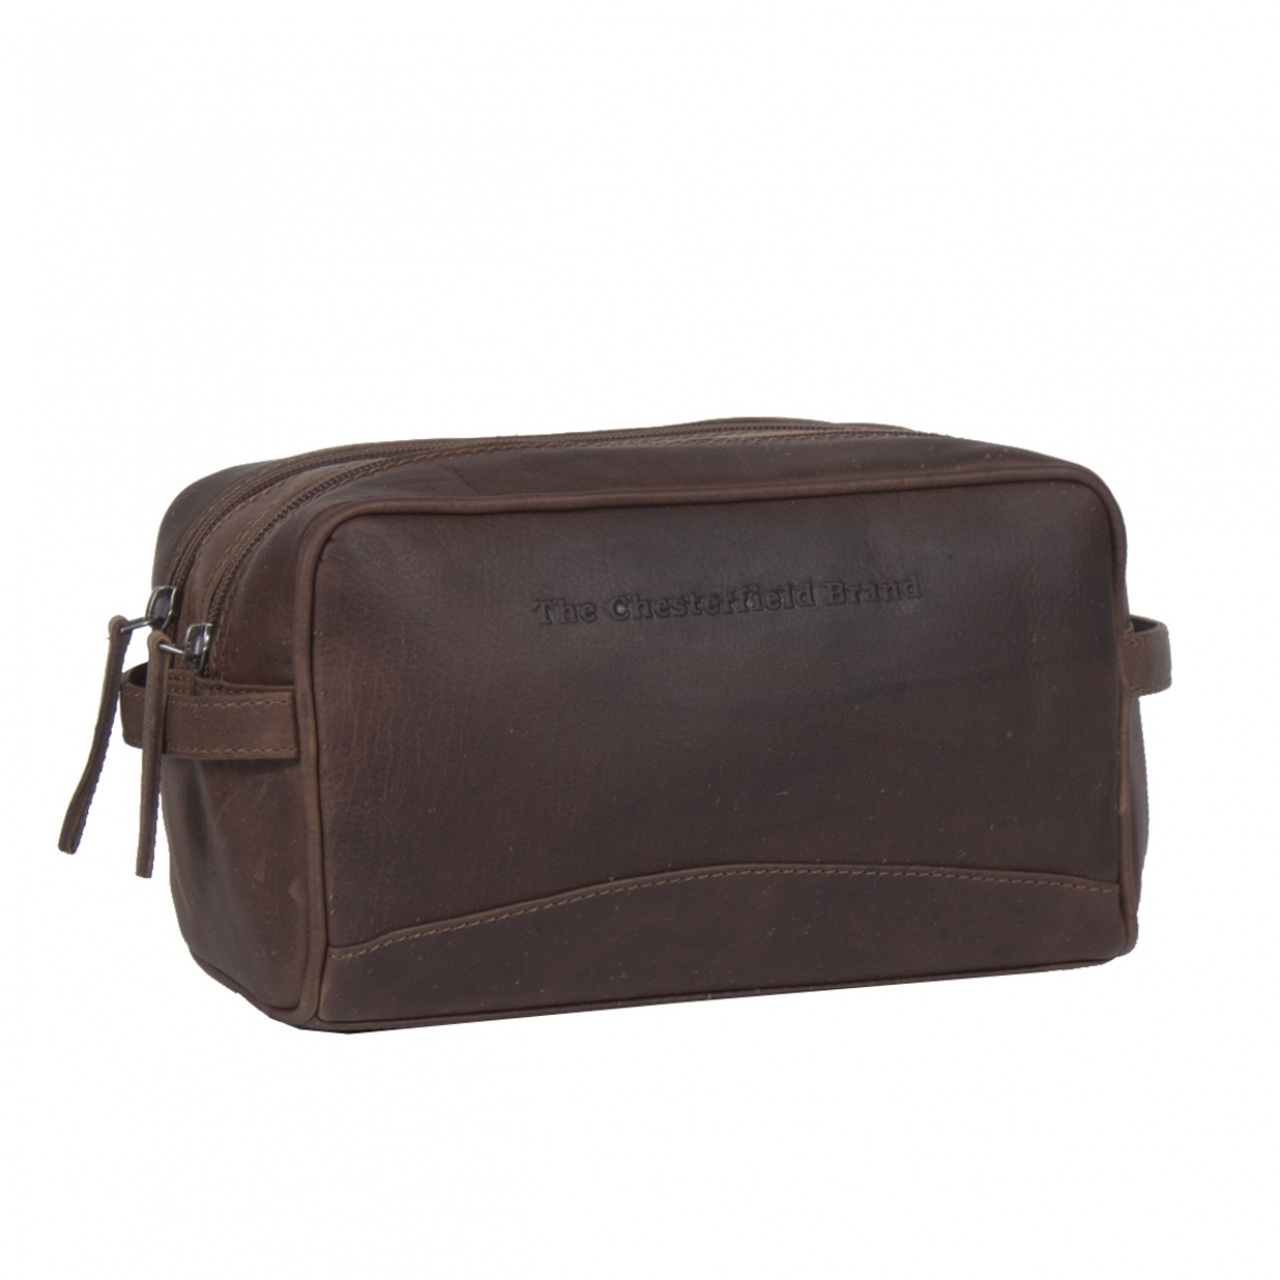 Geantă cosmetică The Chesterfield Brand Brown Stacey